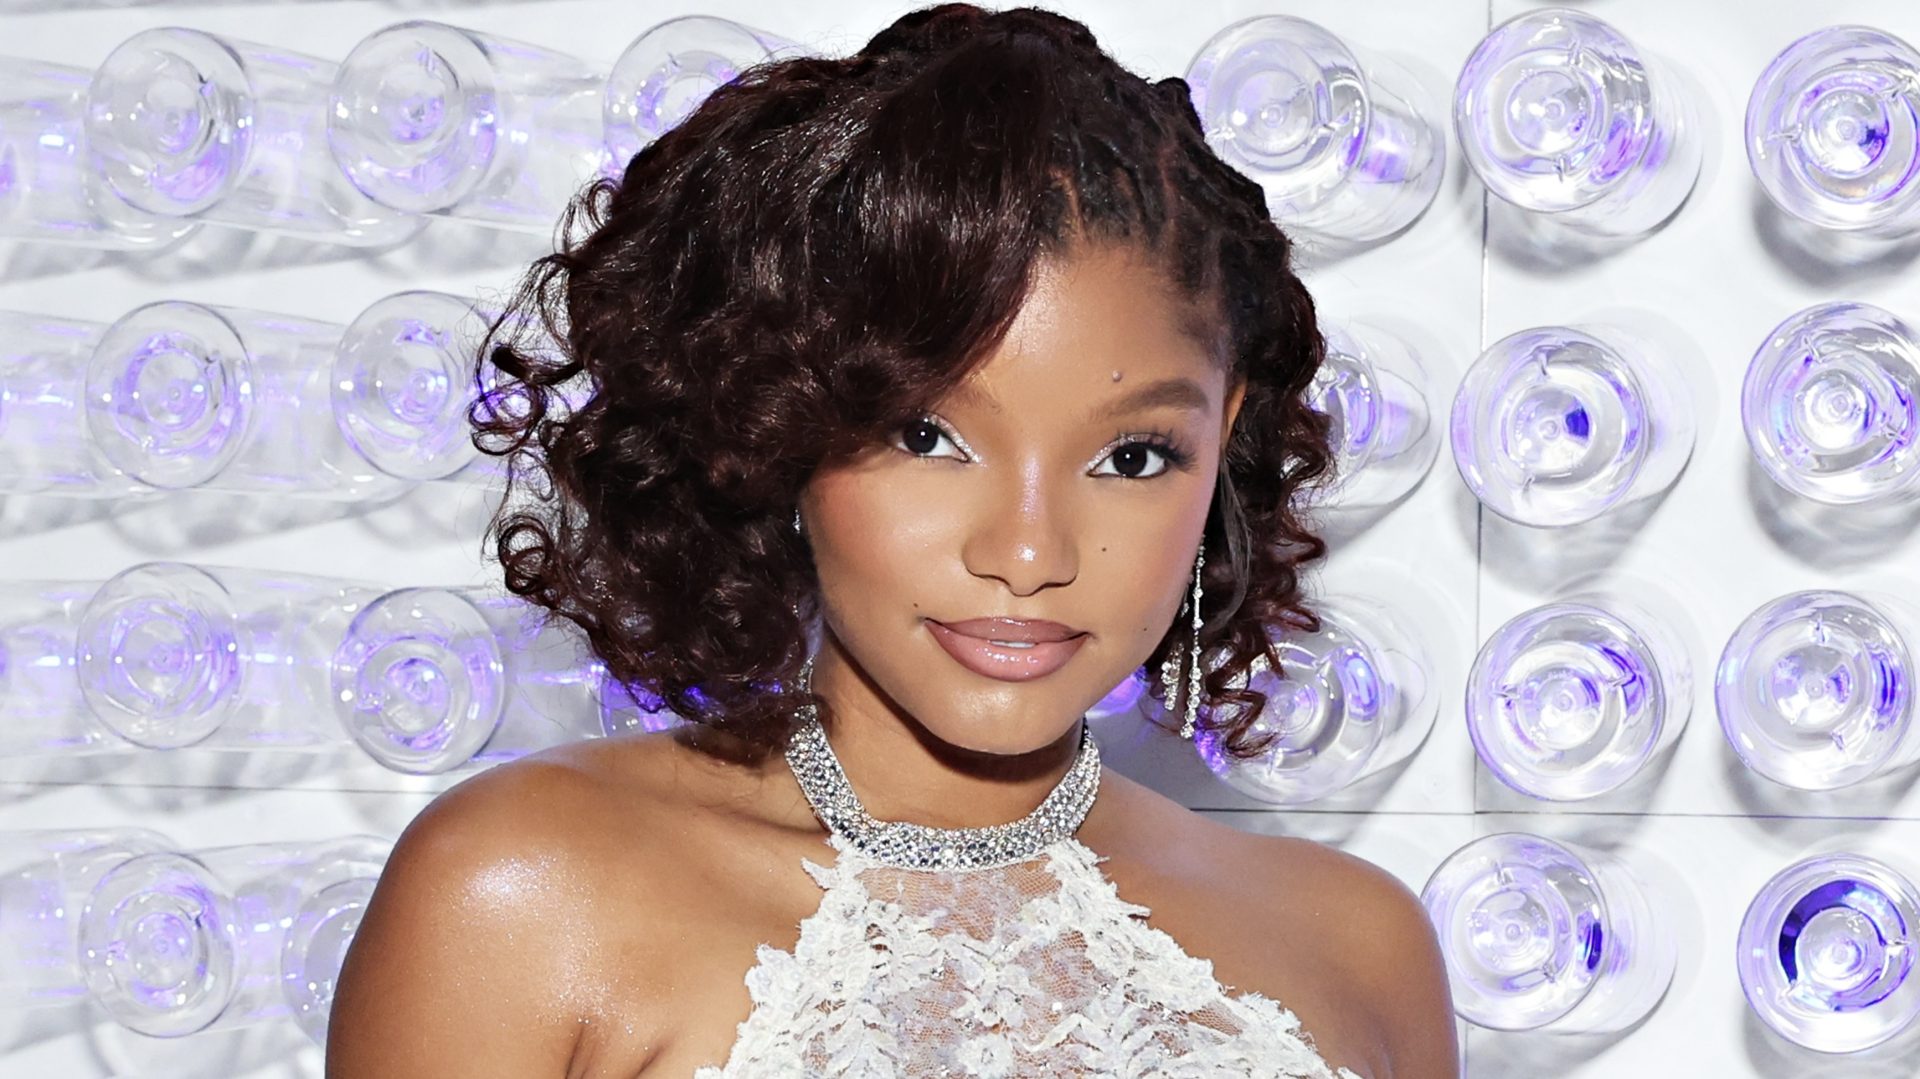 Mermaid Halle Bailey Reflects On 'Emotional' Isolation While Filming Signature The Little Mermaid Track